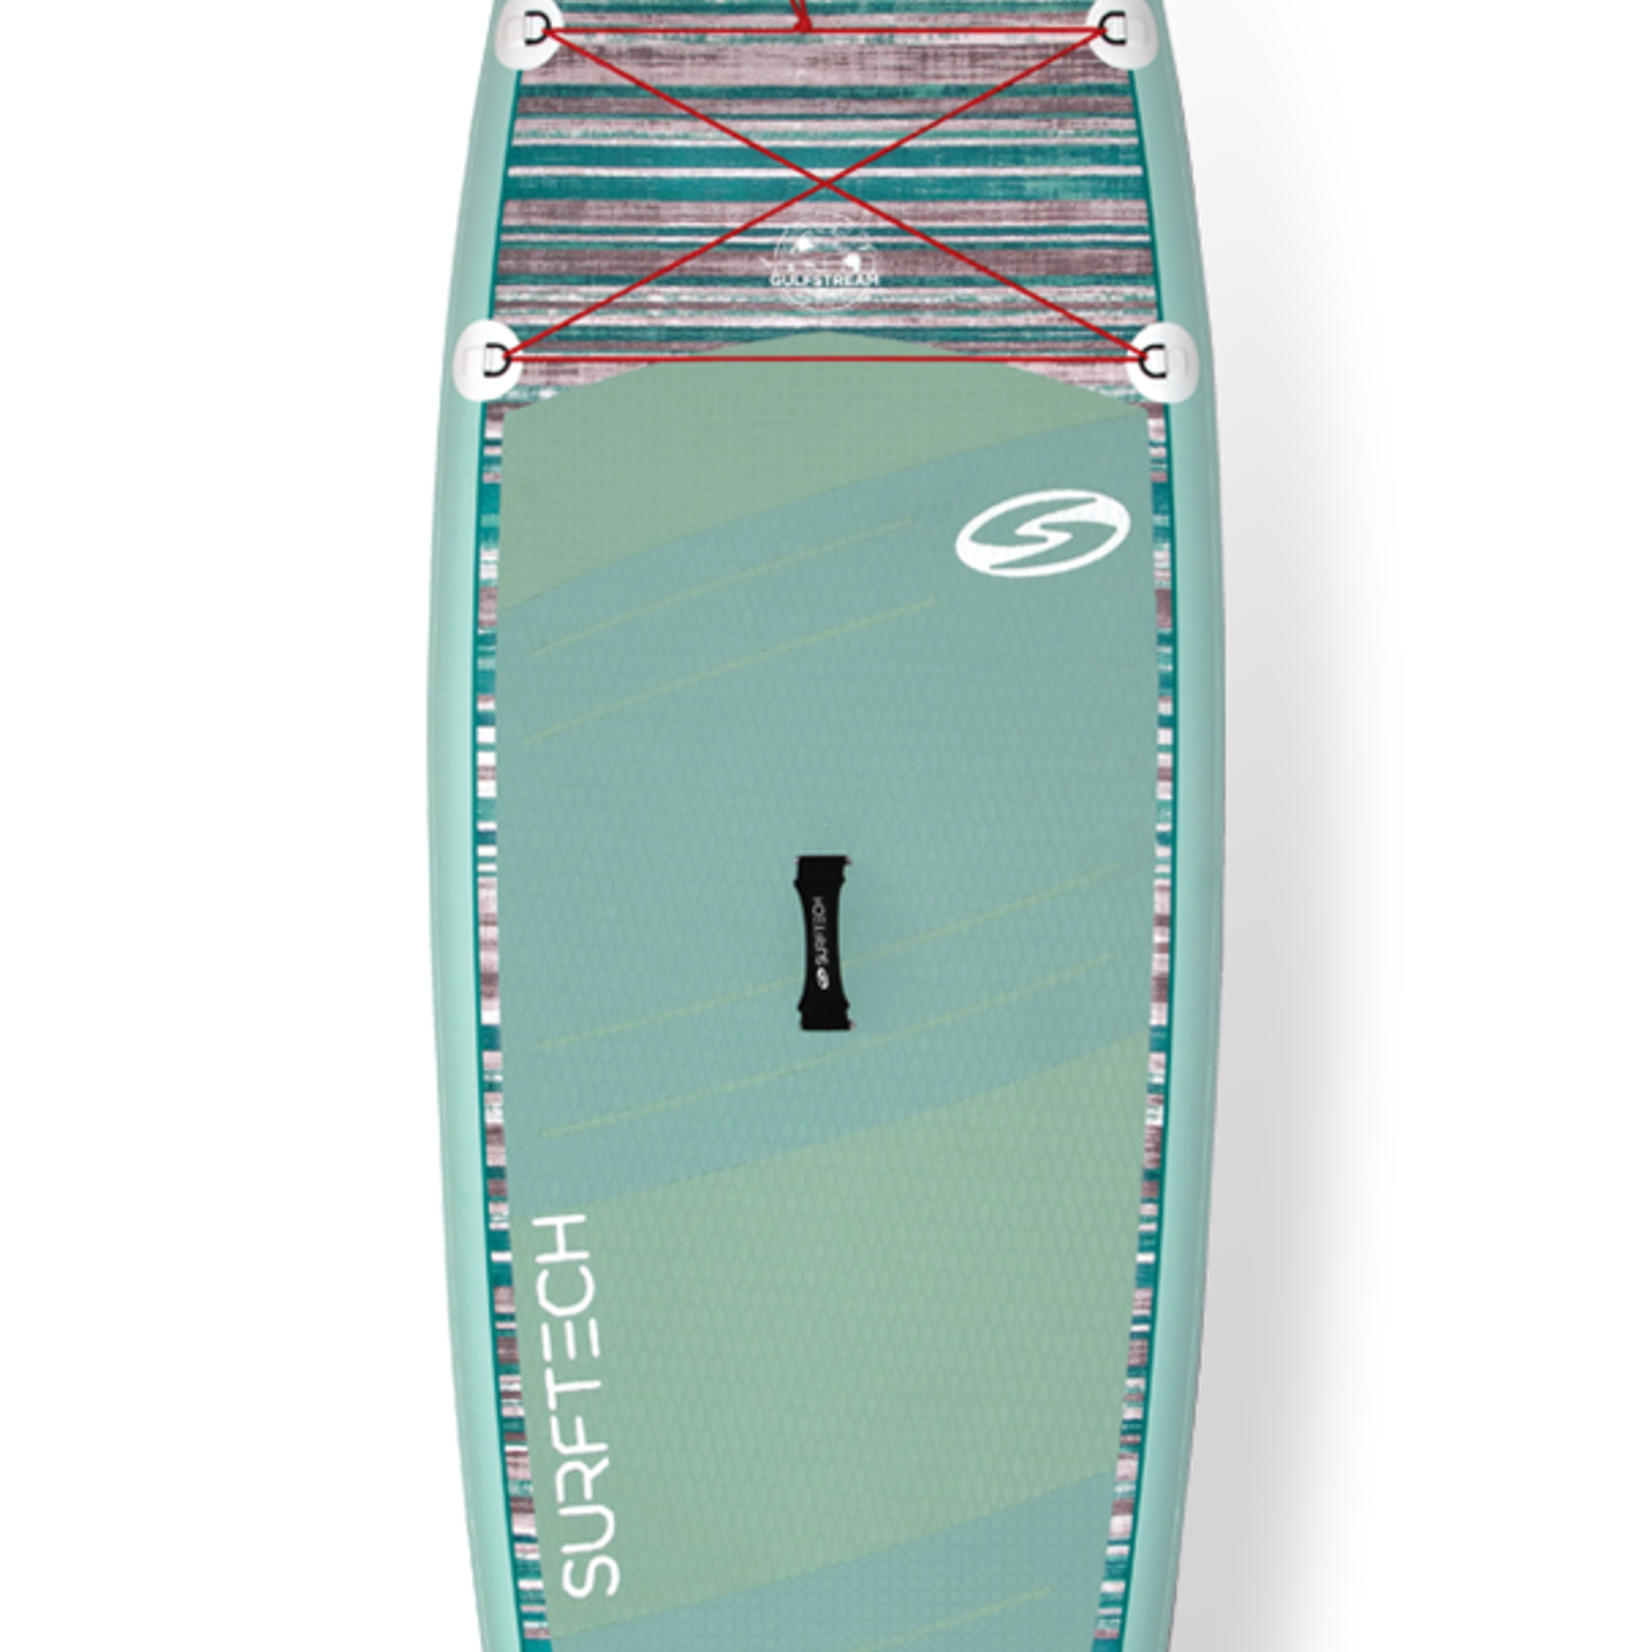 Surftech Air Travel iSUP paddleboard